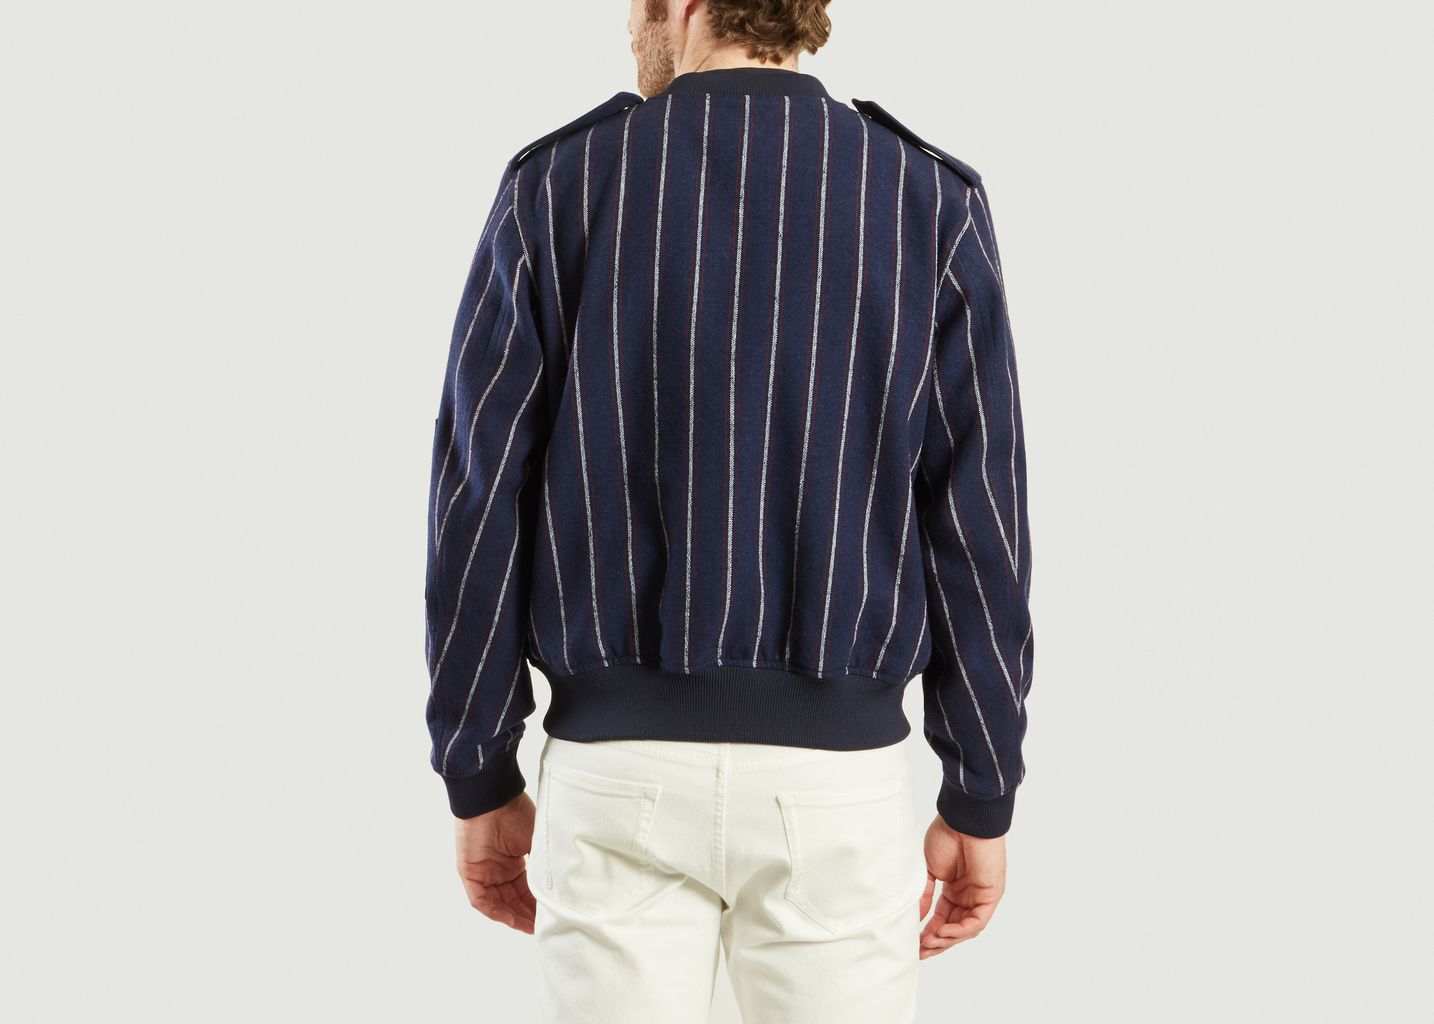 Striped Bomber Jacket - Editions M.R